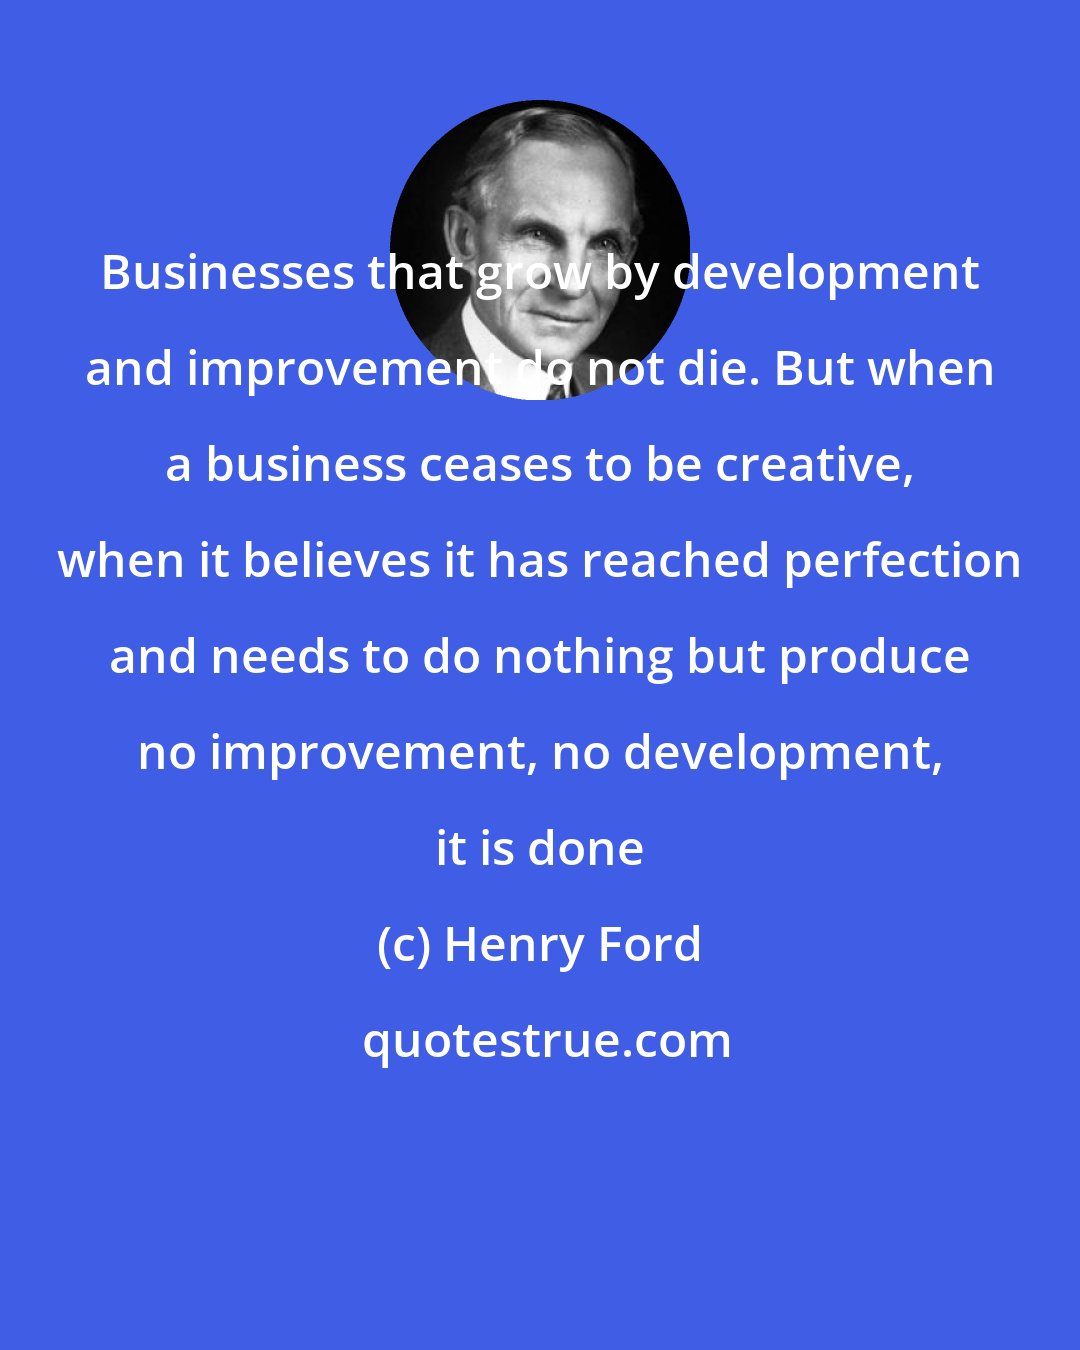 Henry Ford: Businesses that grow by development and improvement do not die. But when a business ceases to be creative, when it believes it has reached perfection and needs to do nothing but produce no improvement, no development, it is done